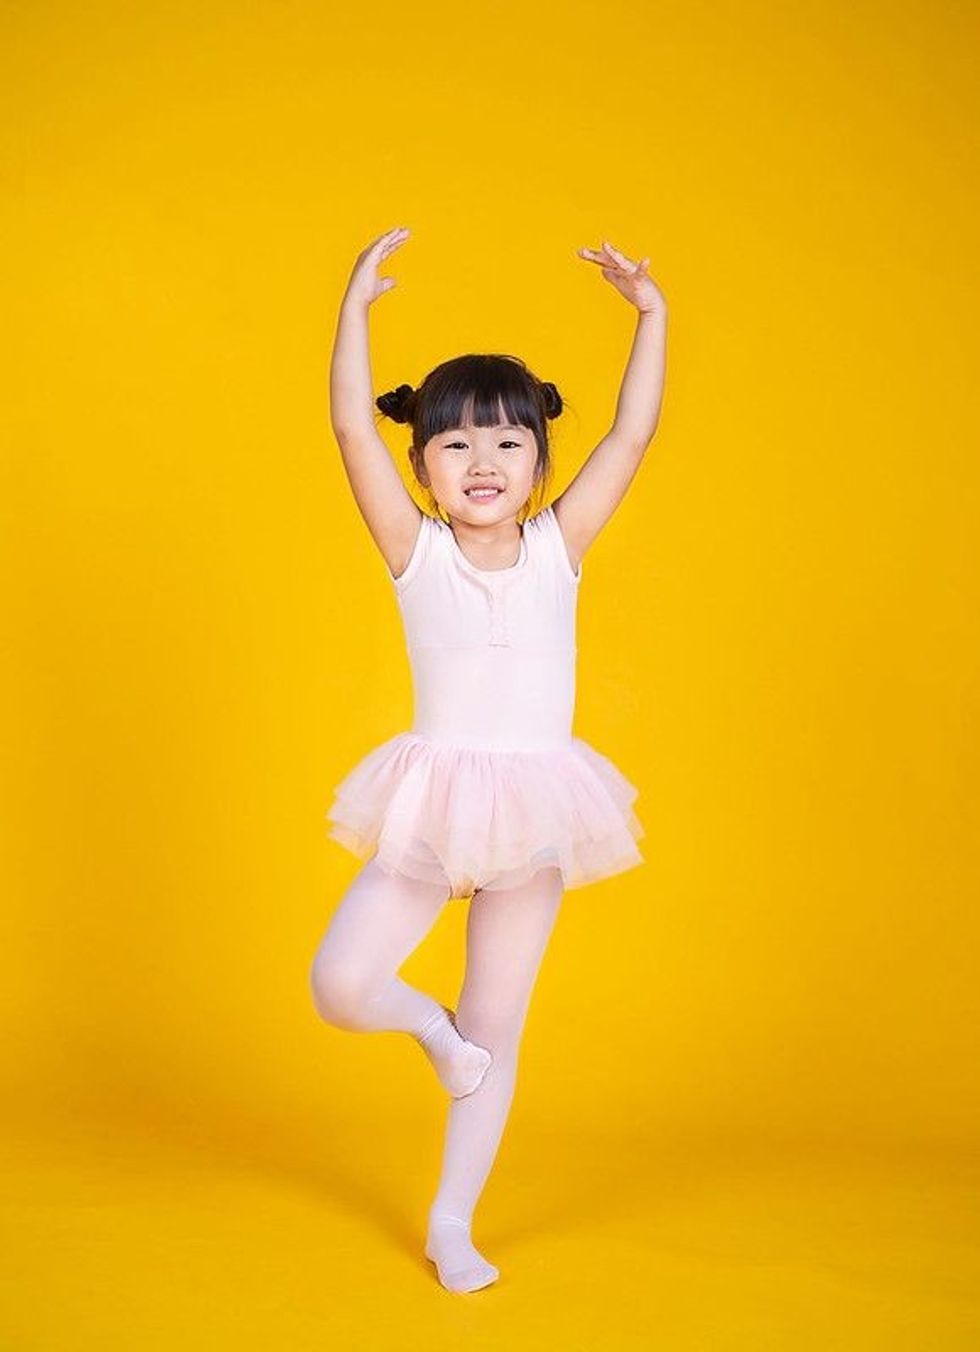 Asian ethnic baby girl dressed as a ballet dancer on yellow background